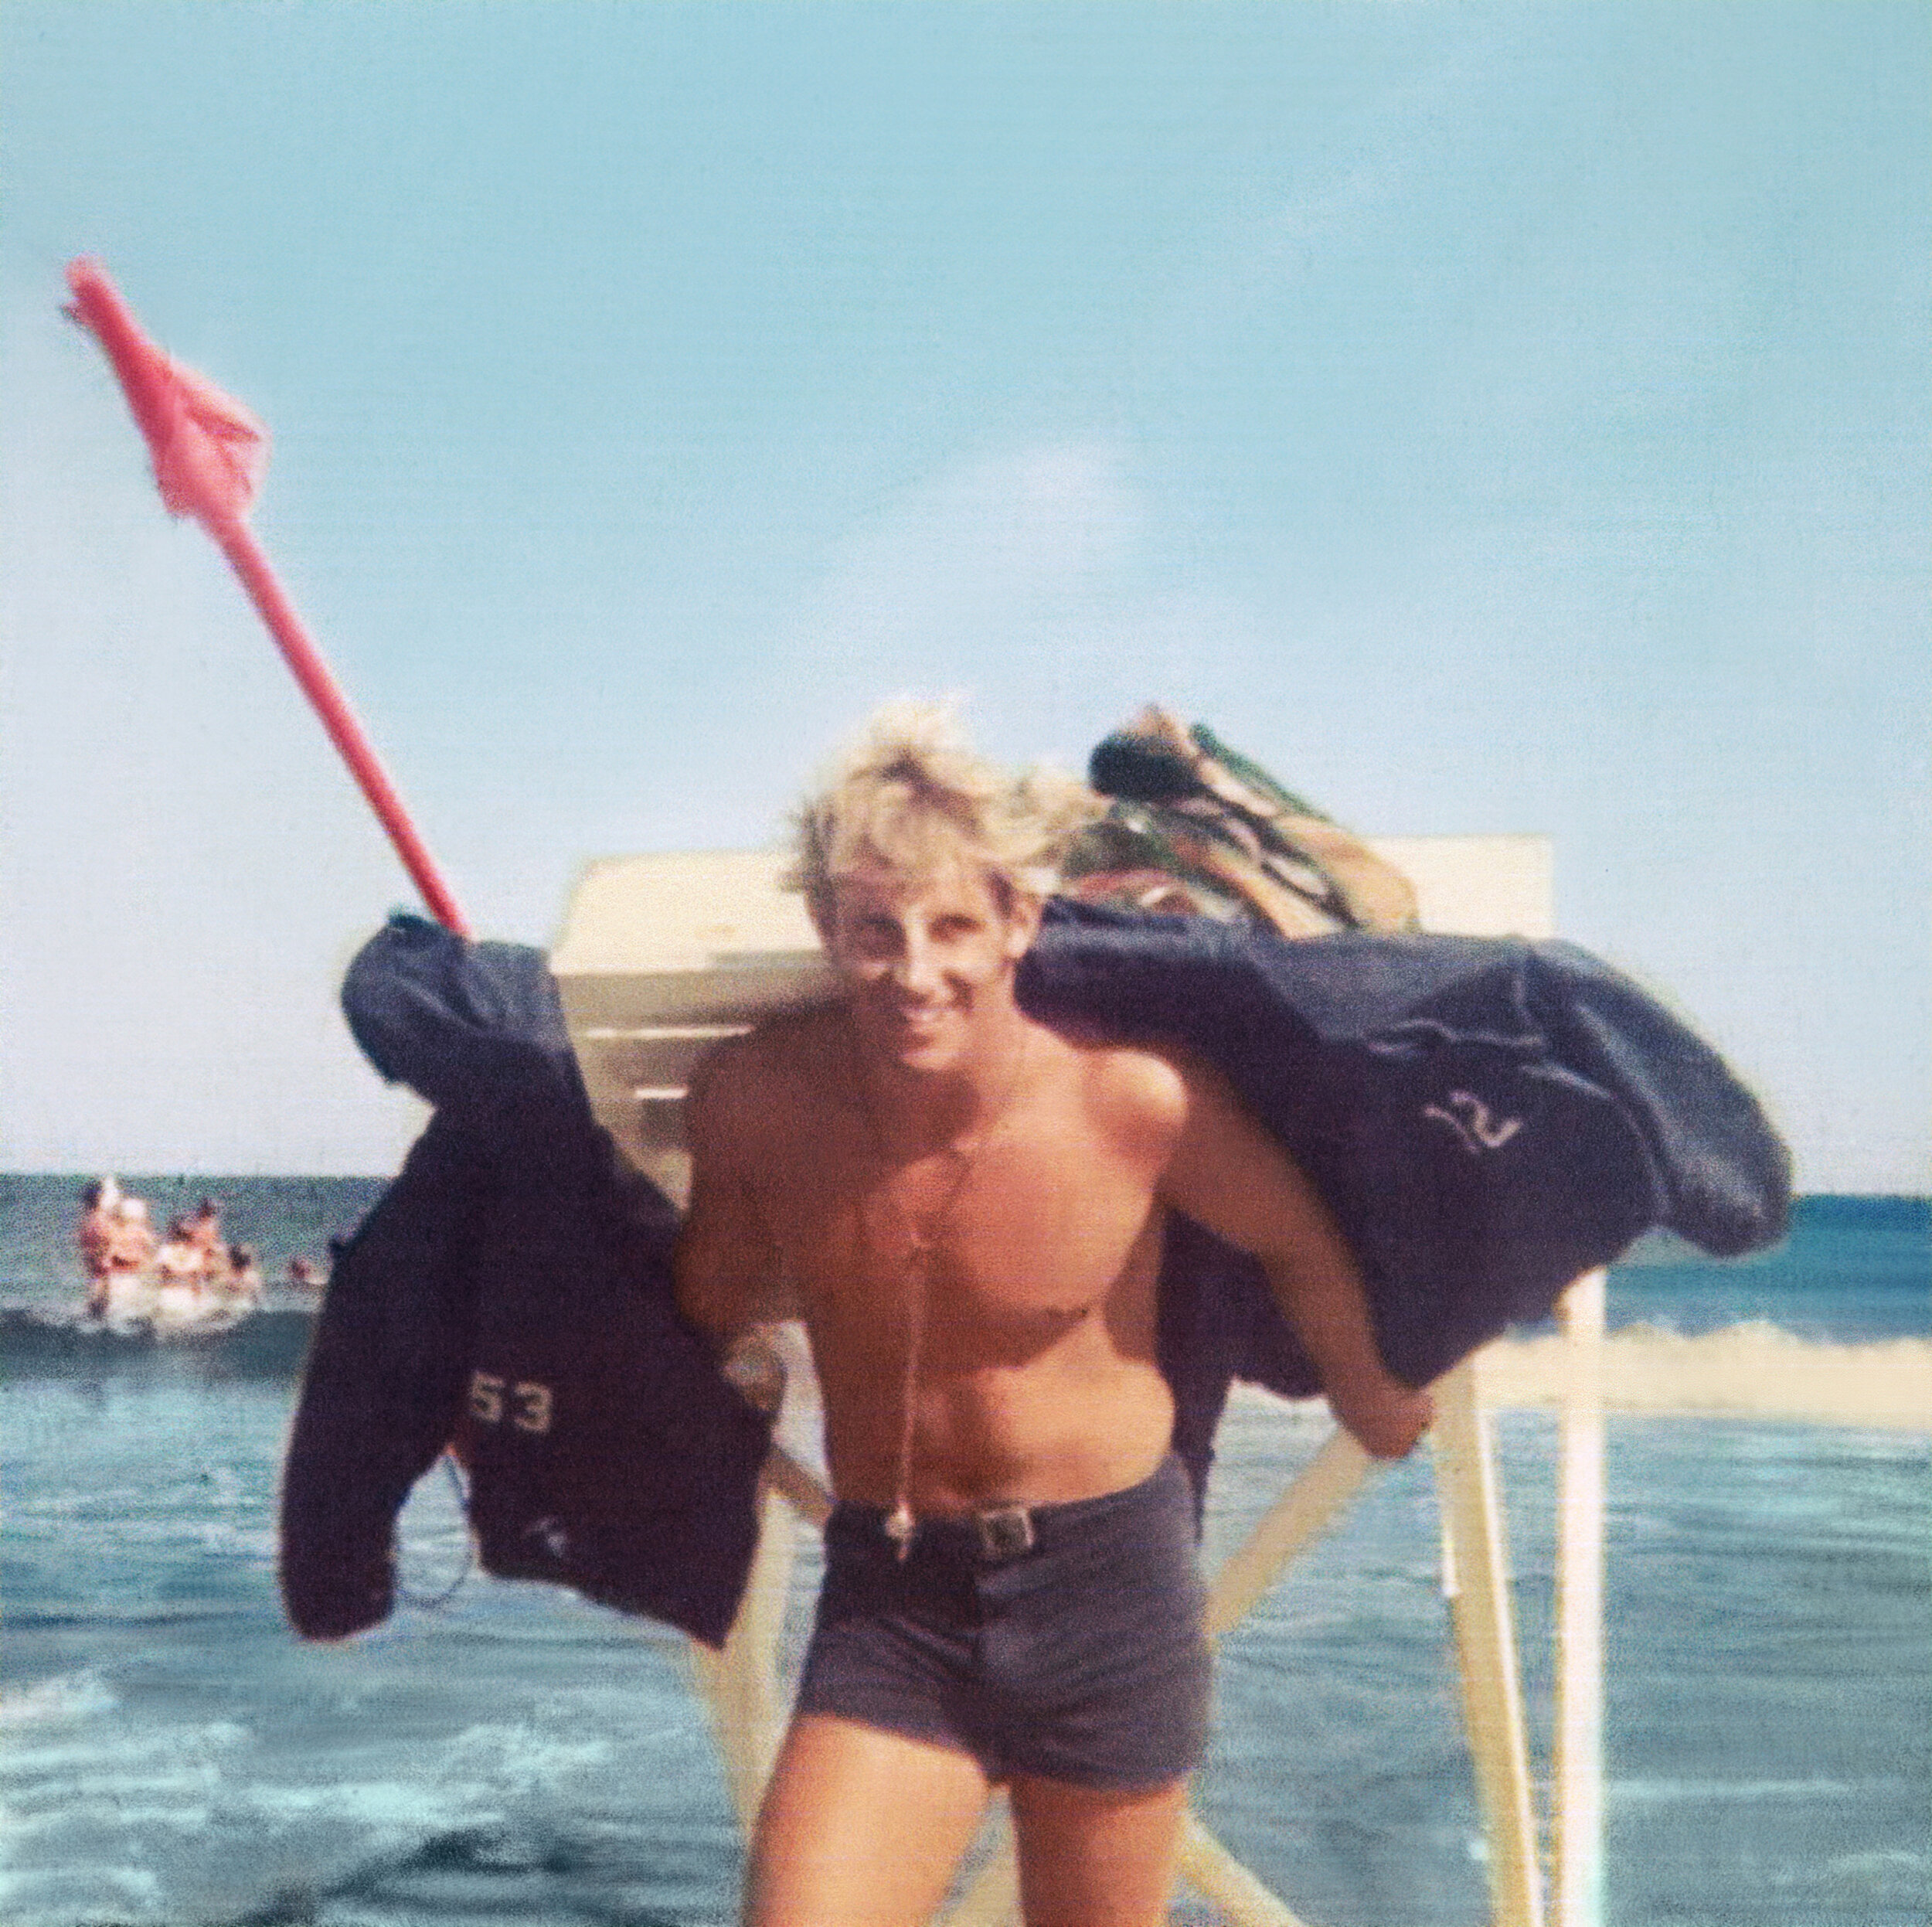 As a rookie lifeguard in 1968, bringing up the stand.